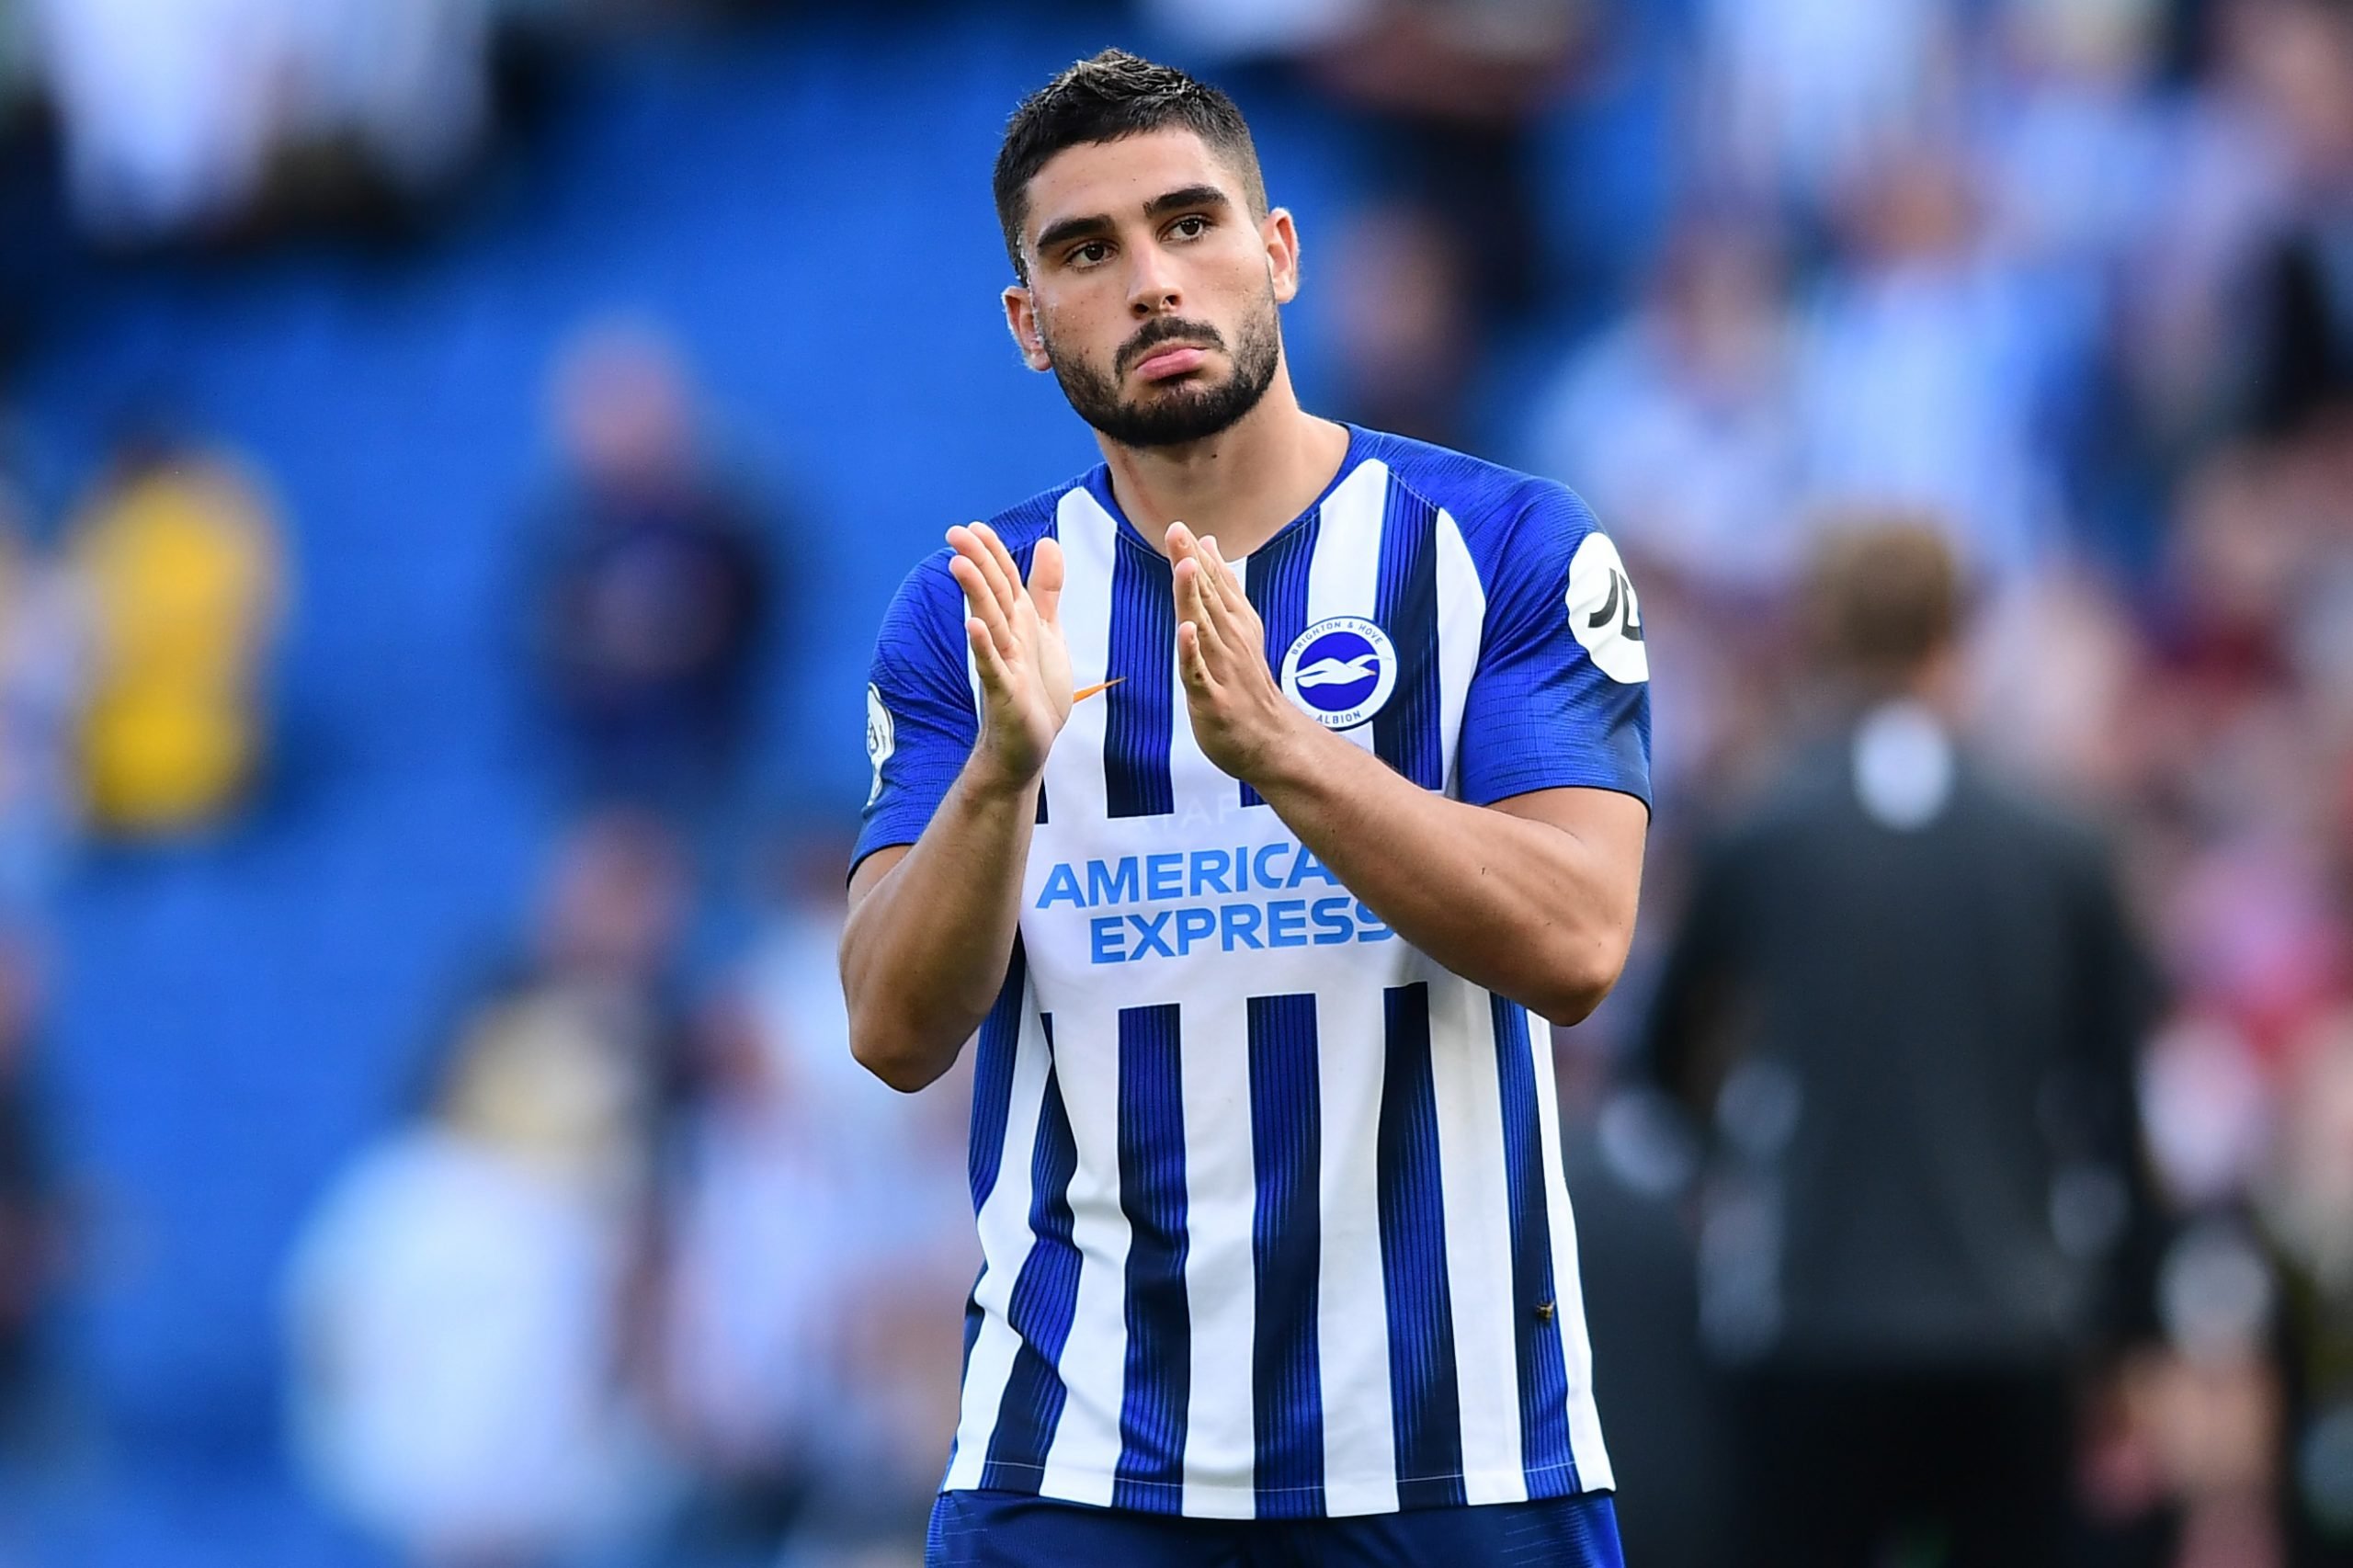 BRIGHTON, ENGLAND - SEPTEMBER 14: Neal Maupay of Brighton & Hove Albion applauds fans after the Premier League match between Brighton & Hove Albion and Burnley FC at American Express Community Stadium on September 14, 2019 in Brighton, United Kingdom. (Photo by Alex Broadway/Getty Images)